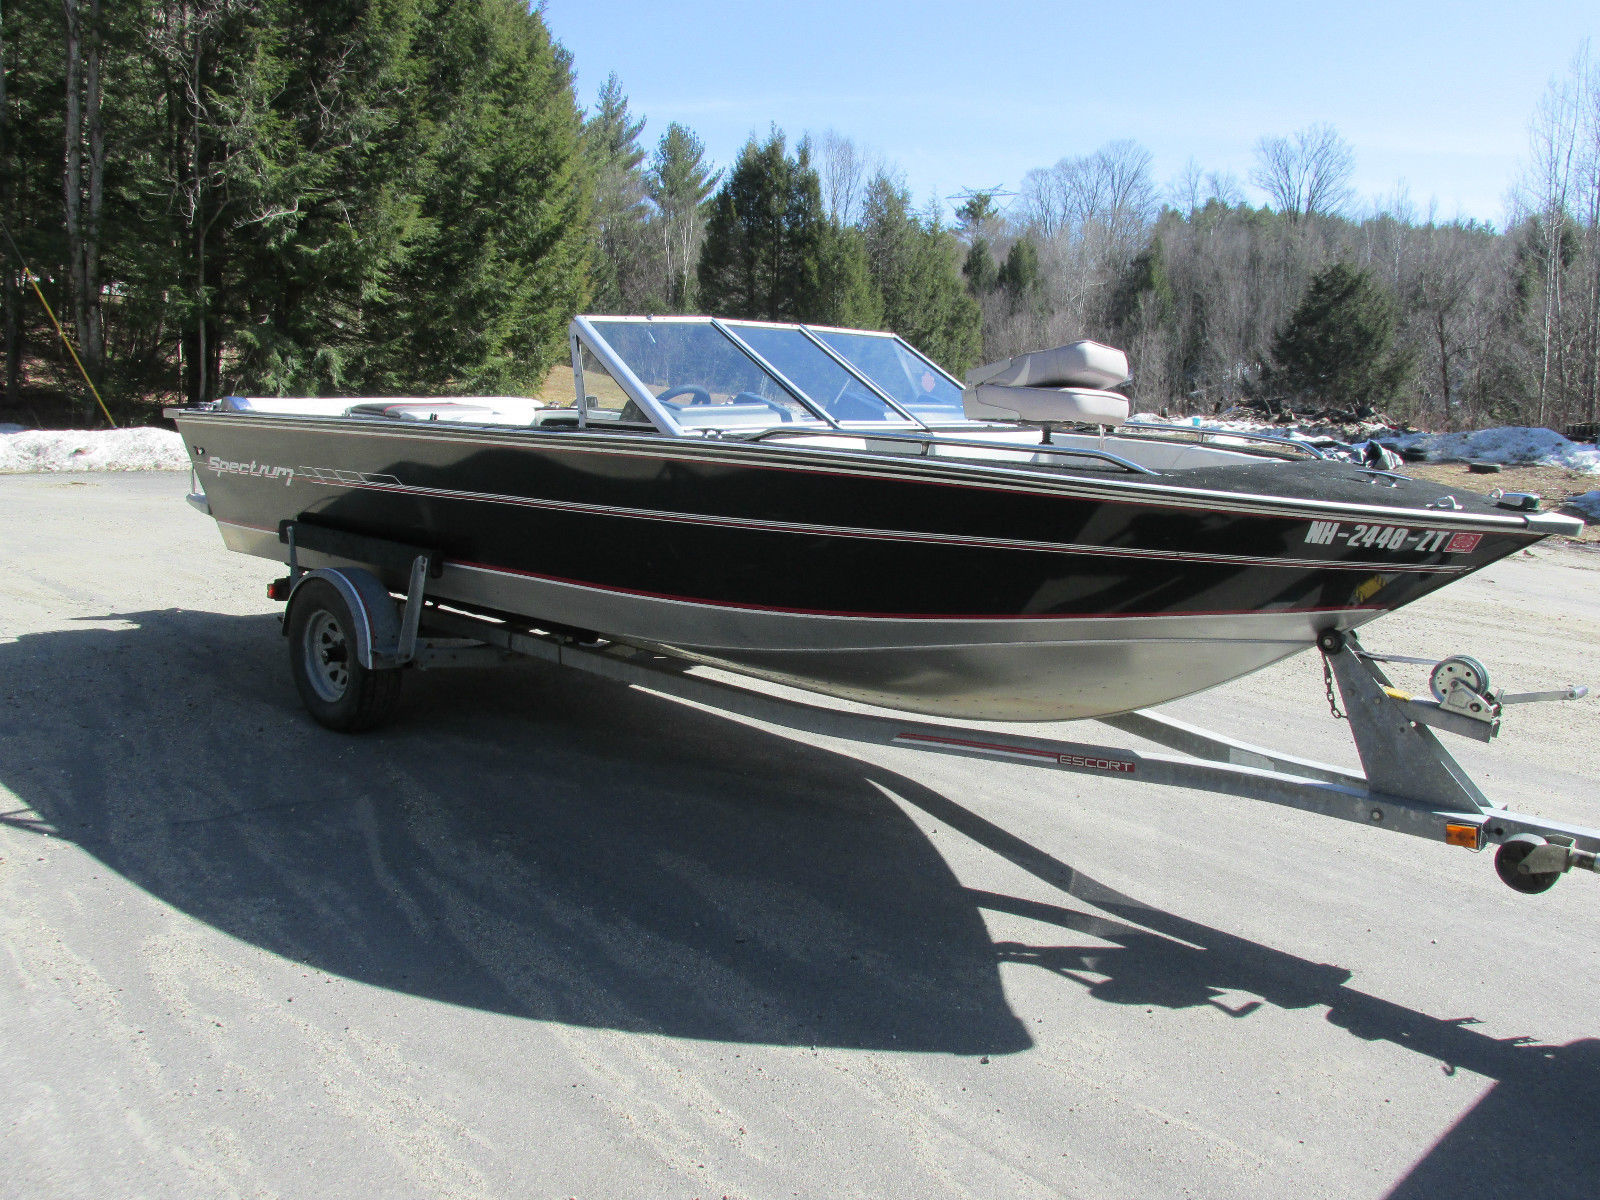 Spectrum 1990 for sale for $3,200 - Boats-from-USA.com